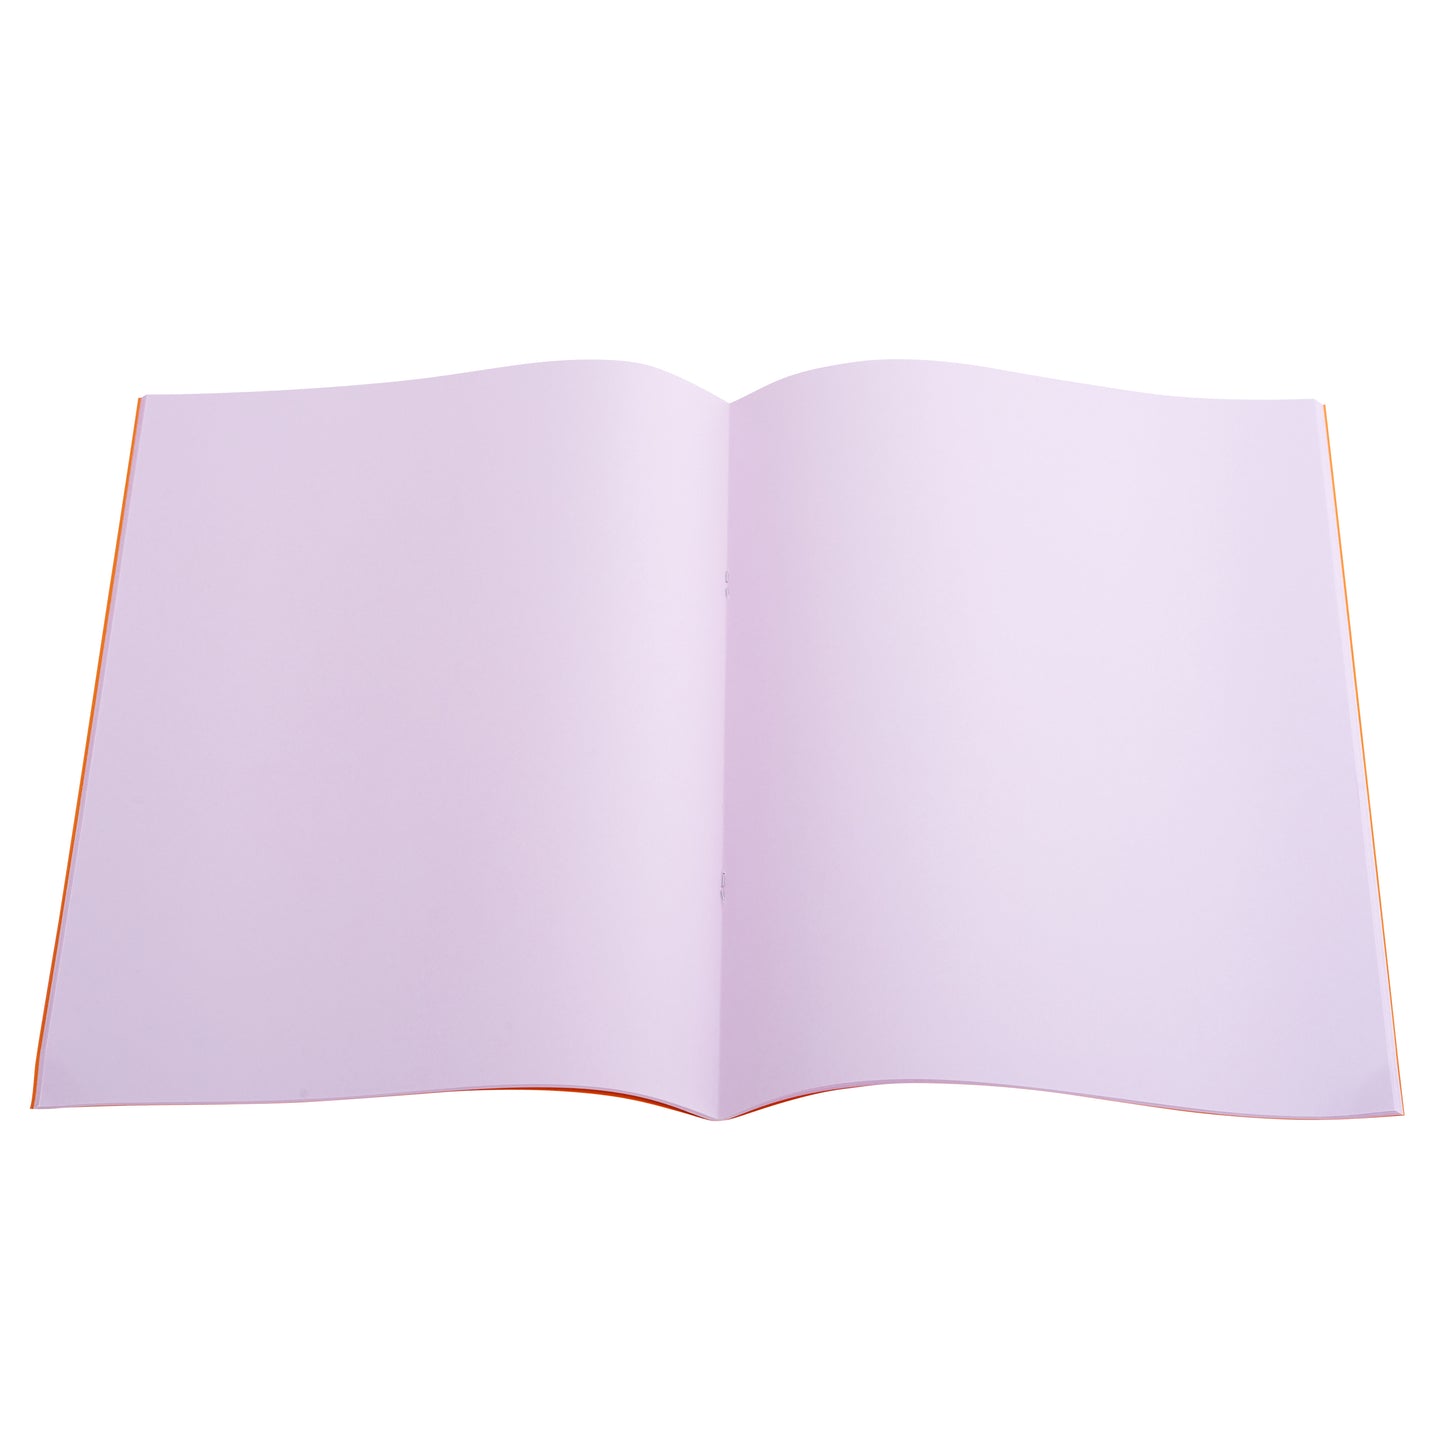 A4 - Plain Tinted Paper - Exercise Books (Orange Cover)